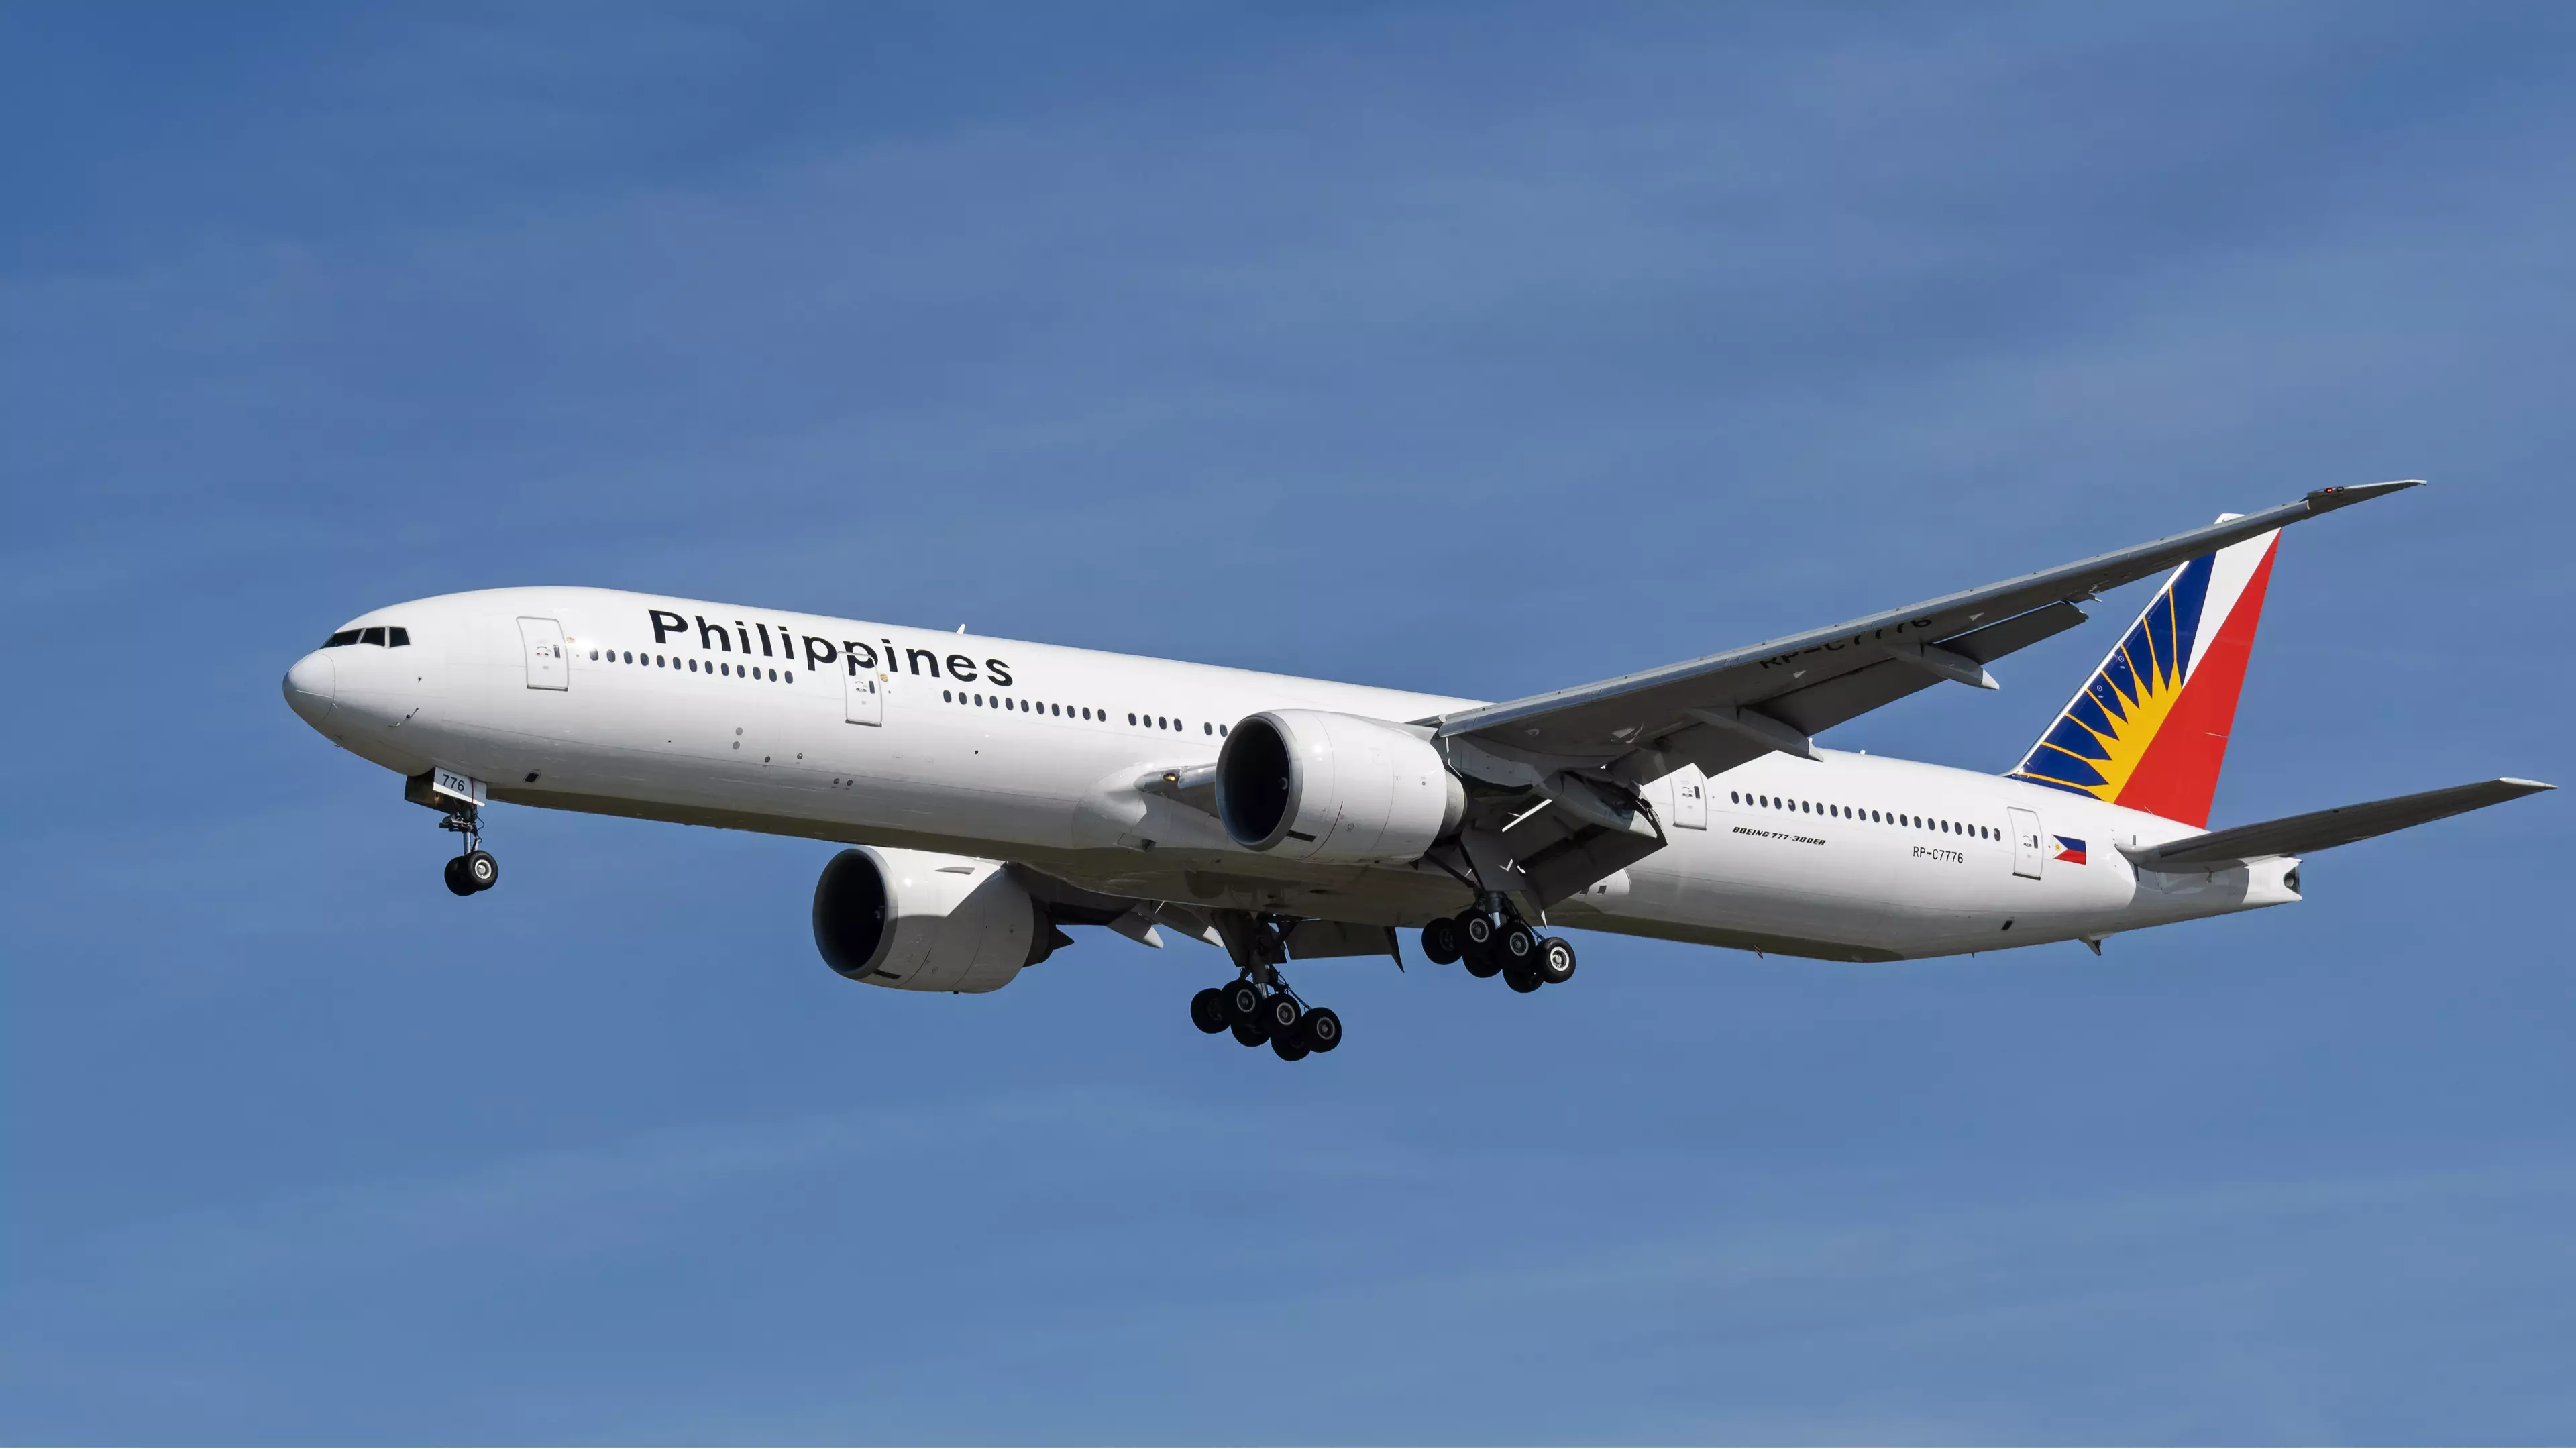 Philippines Airlines confirmed the plane landed safely following the 'technical incident'.